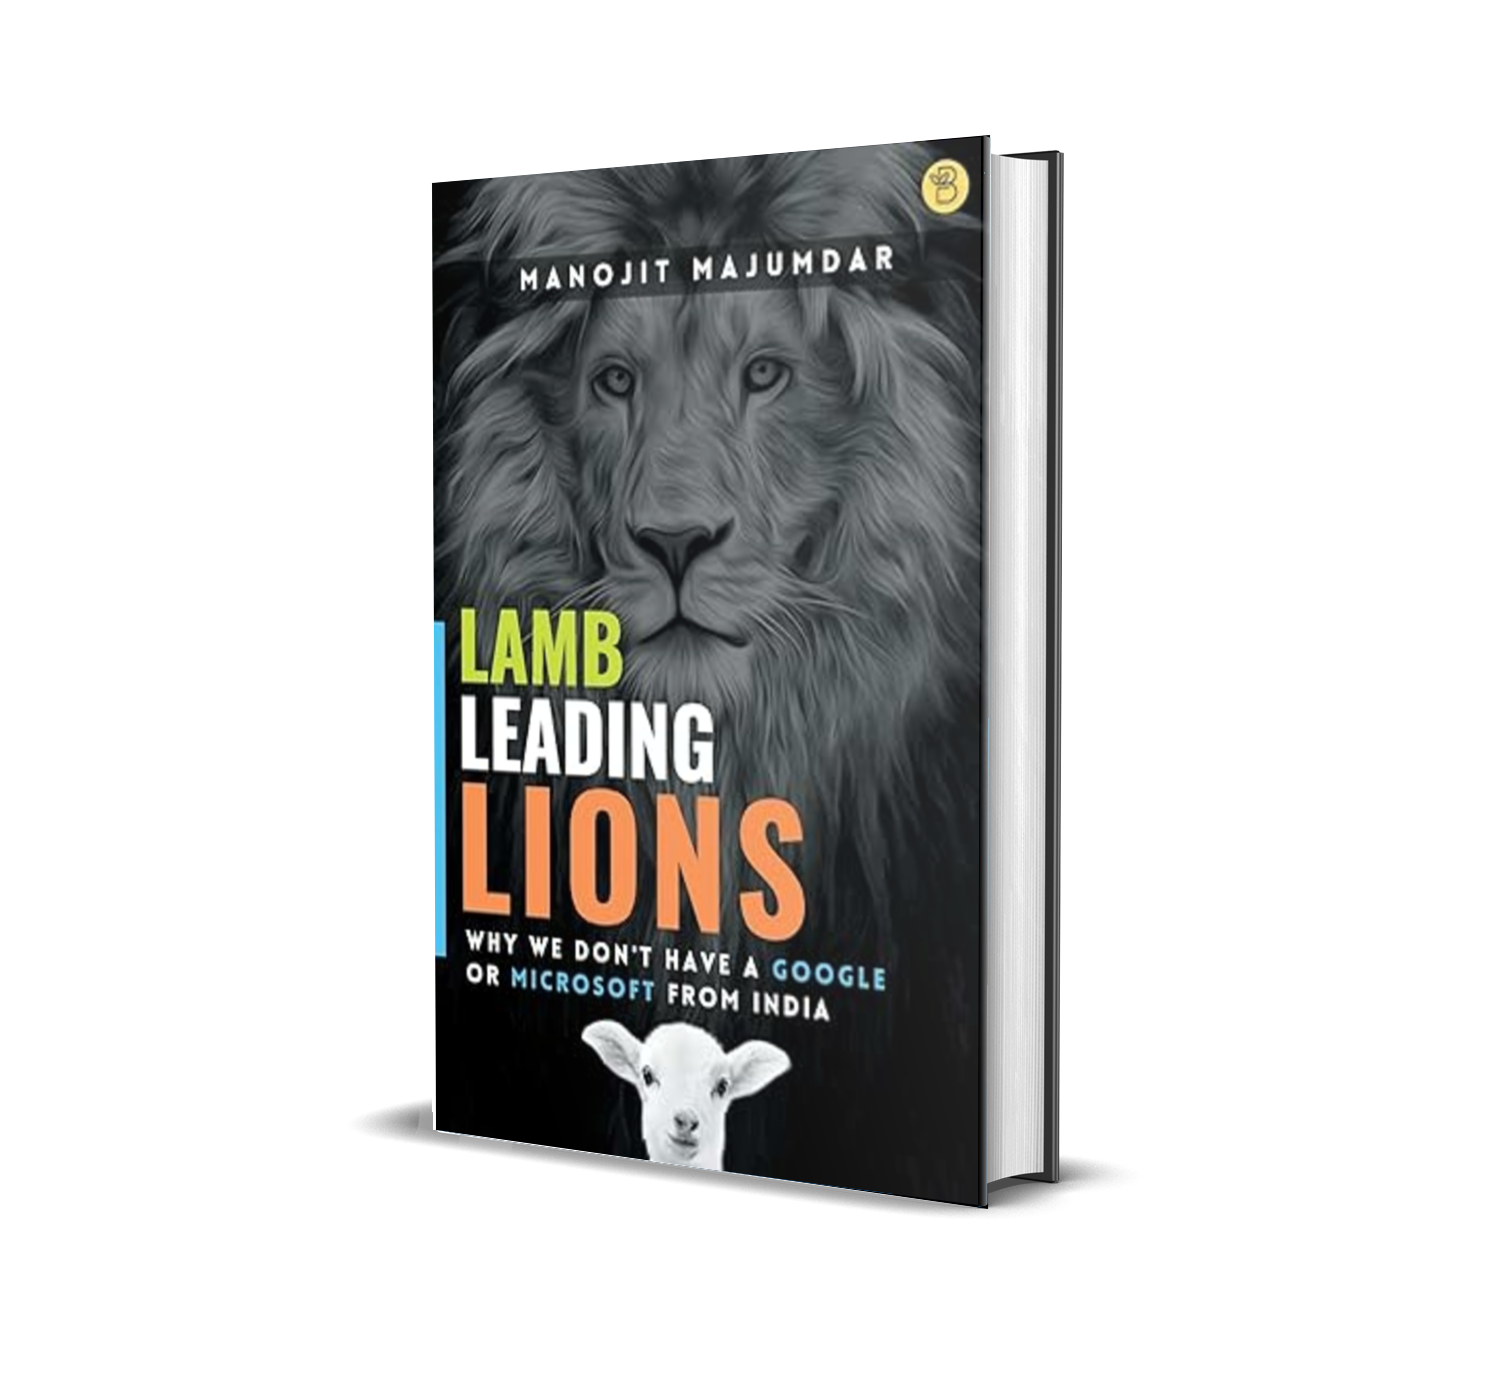 You are currently viewing Lamb Leading Lions – Buy on Amazon